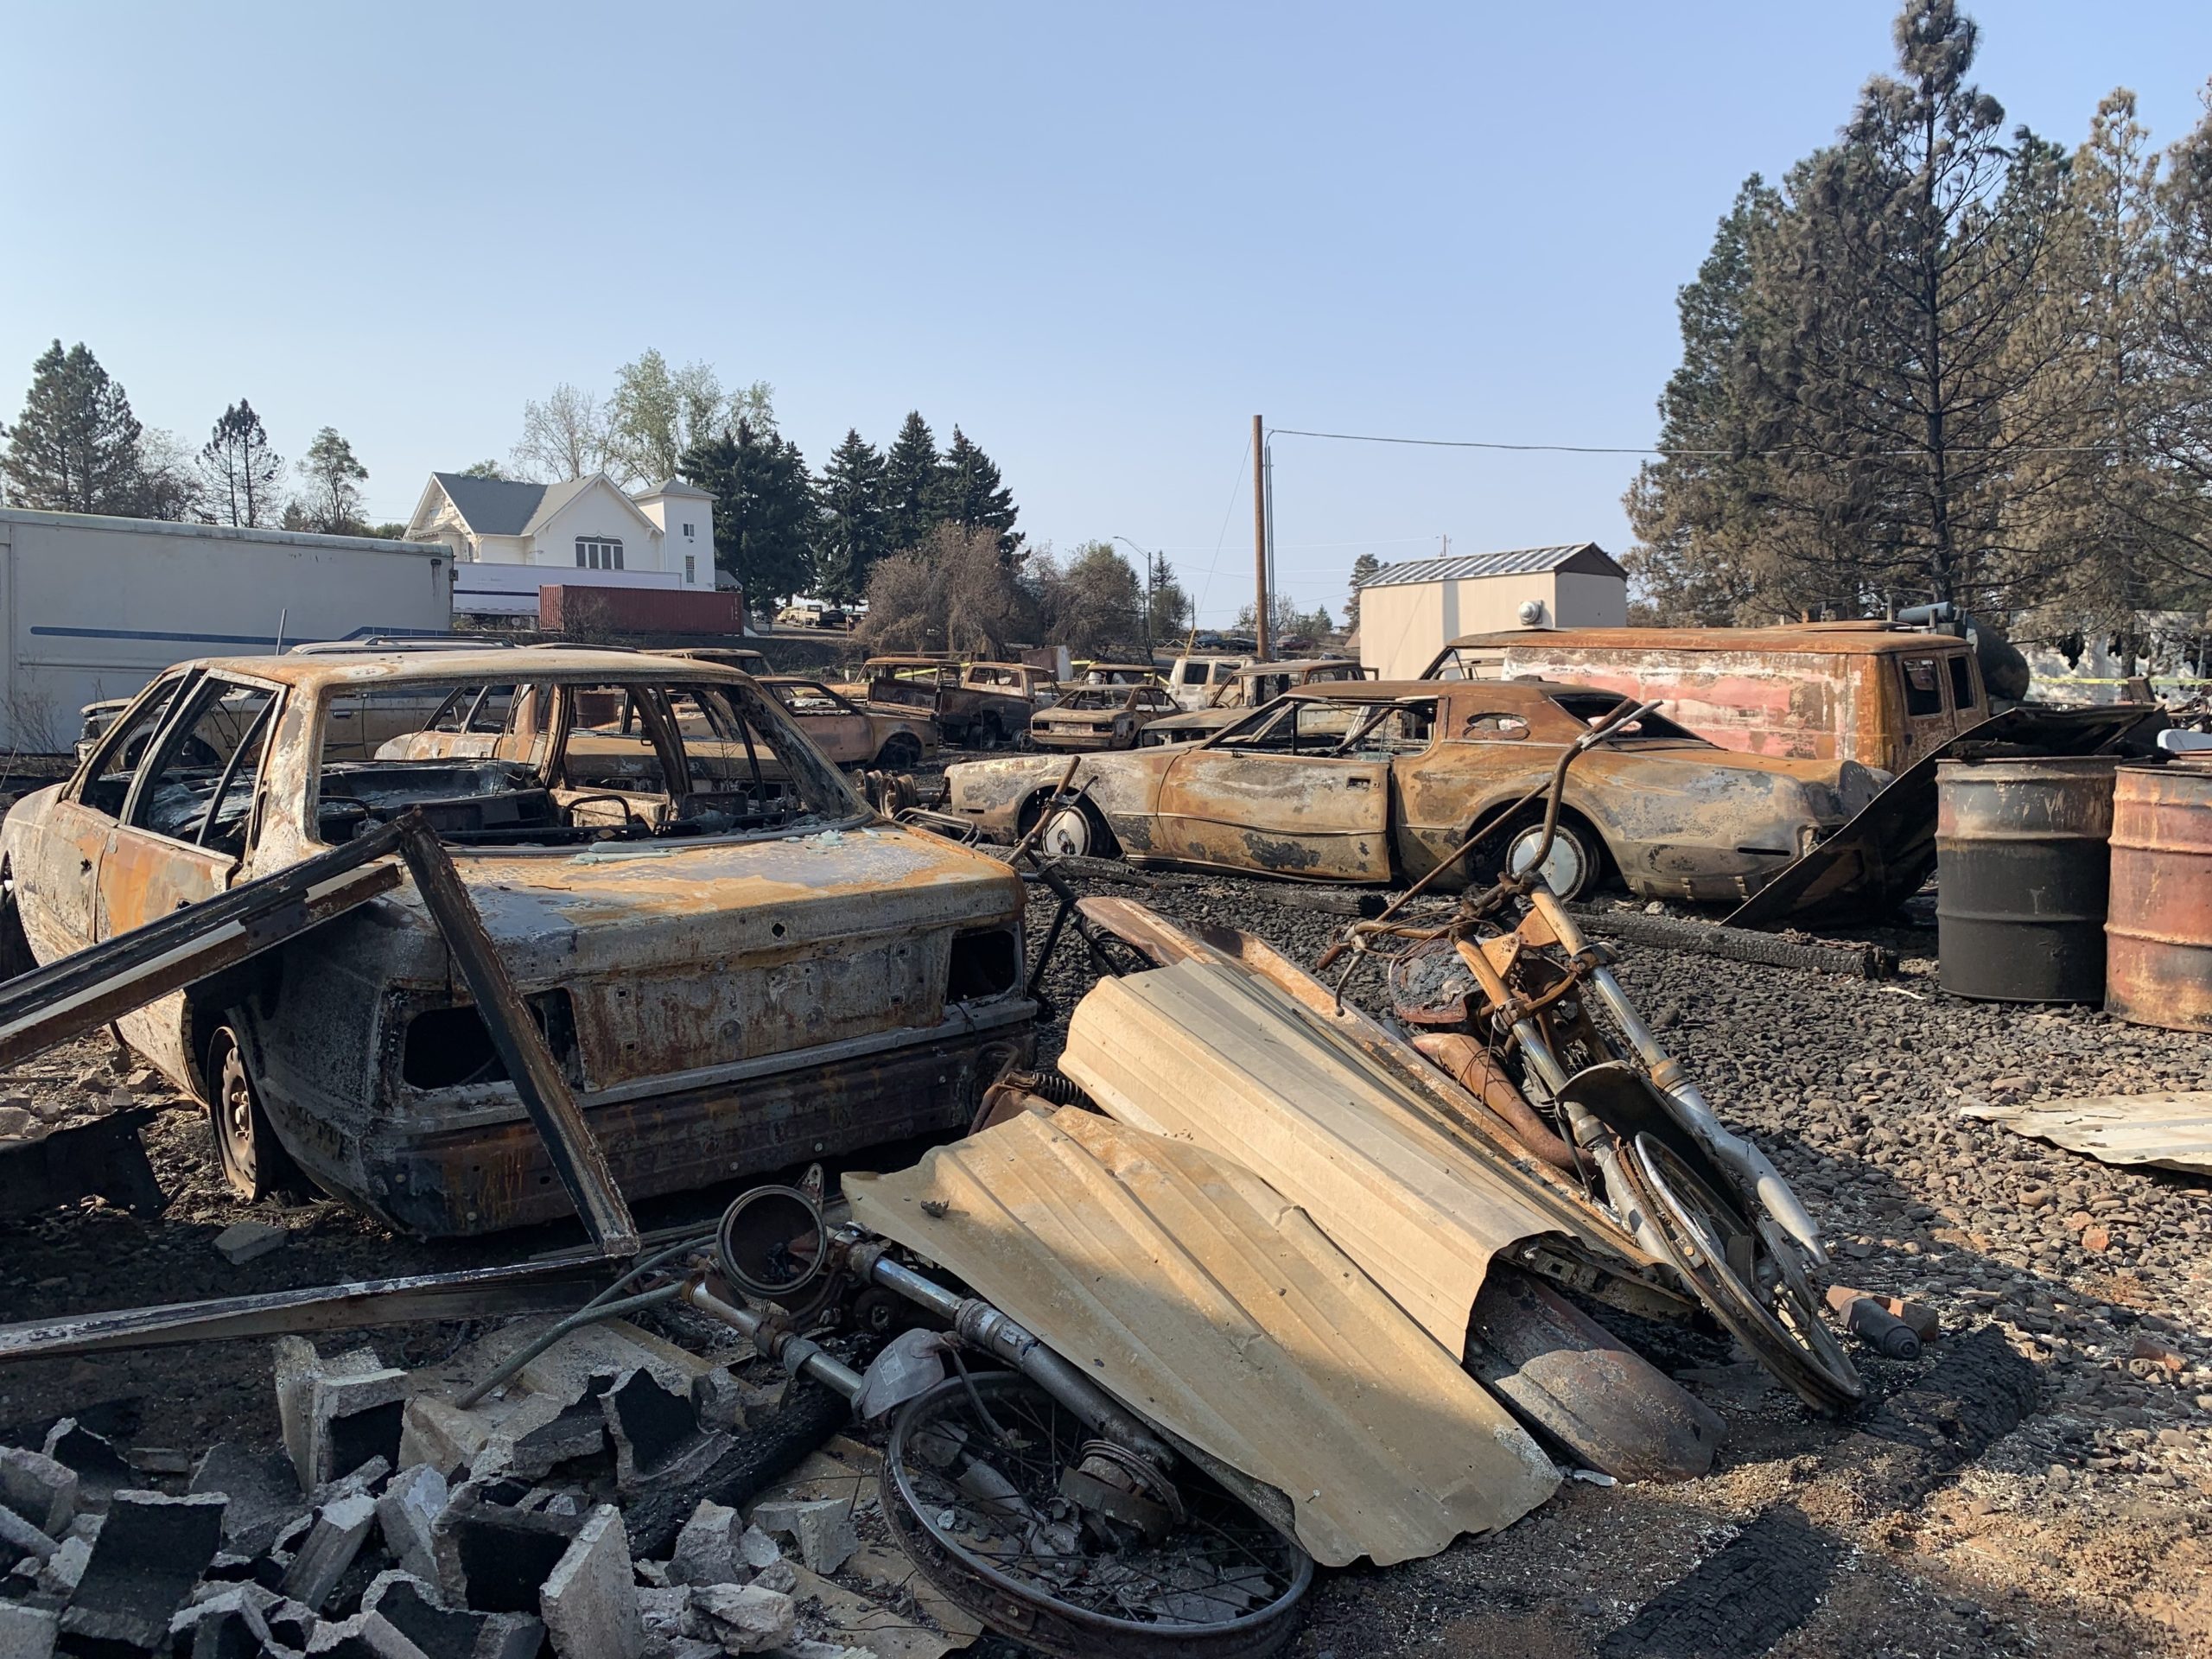 Most of the buildings and homes in Malden, Wash. were destroyed in the Labor Day wildfire. CREDIT: Kirk Siegler/NPR